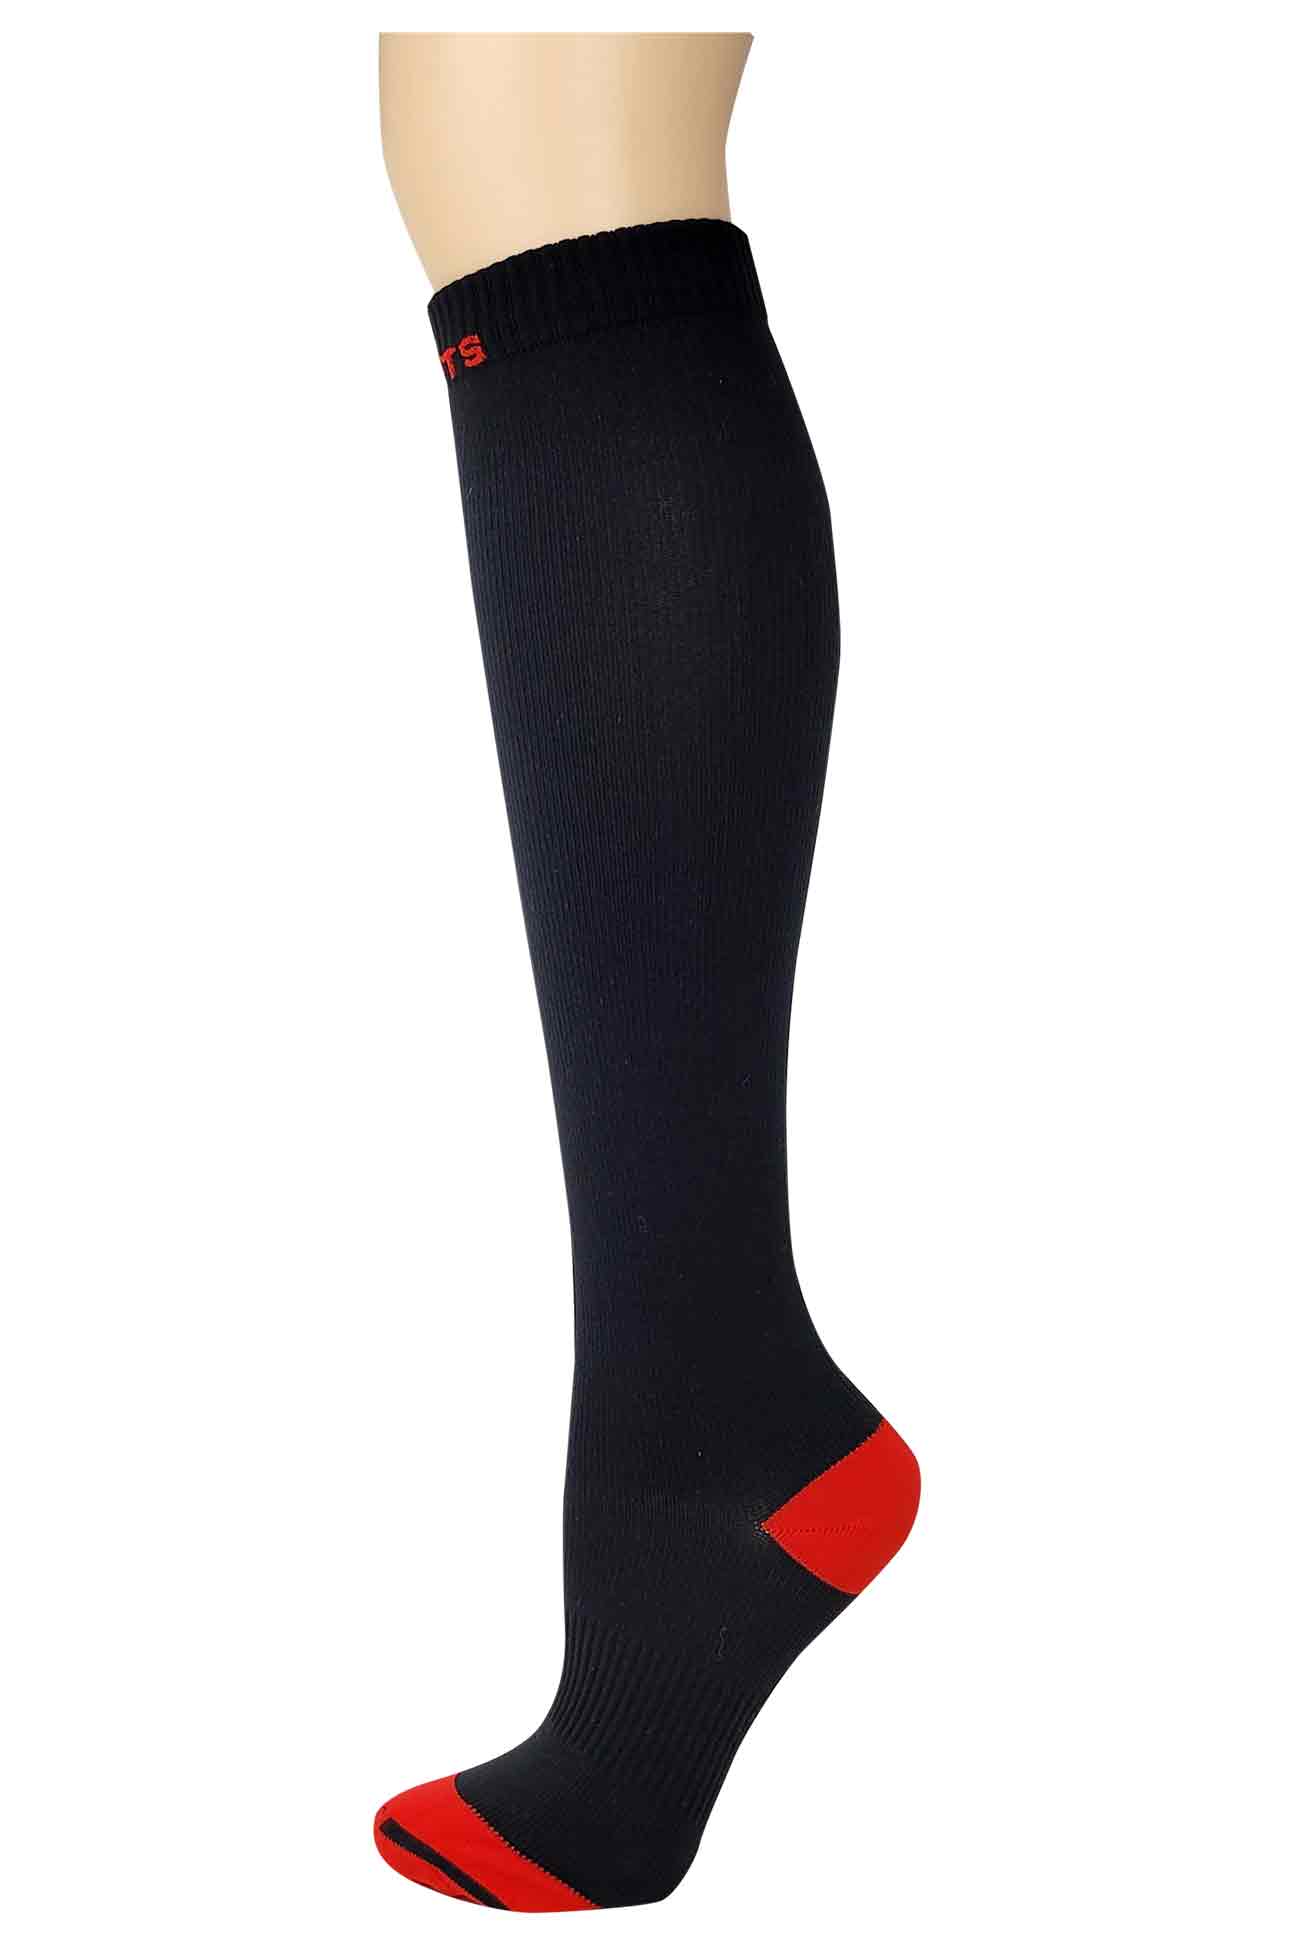 Knee-High Compression Socks | Solid Colors Nylon Sports | Unisex (1 Pair)